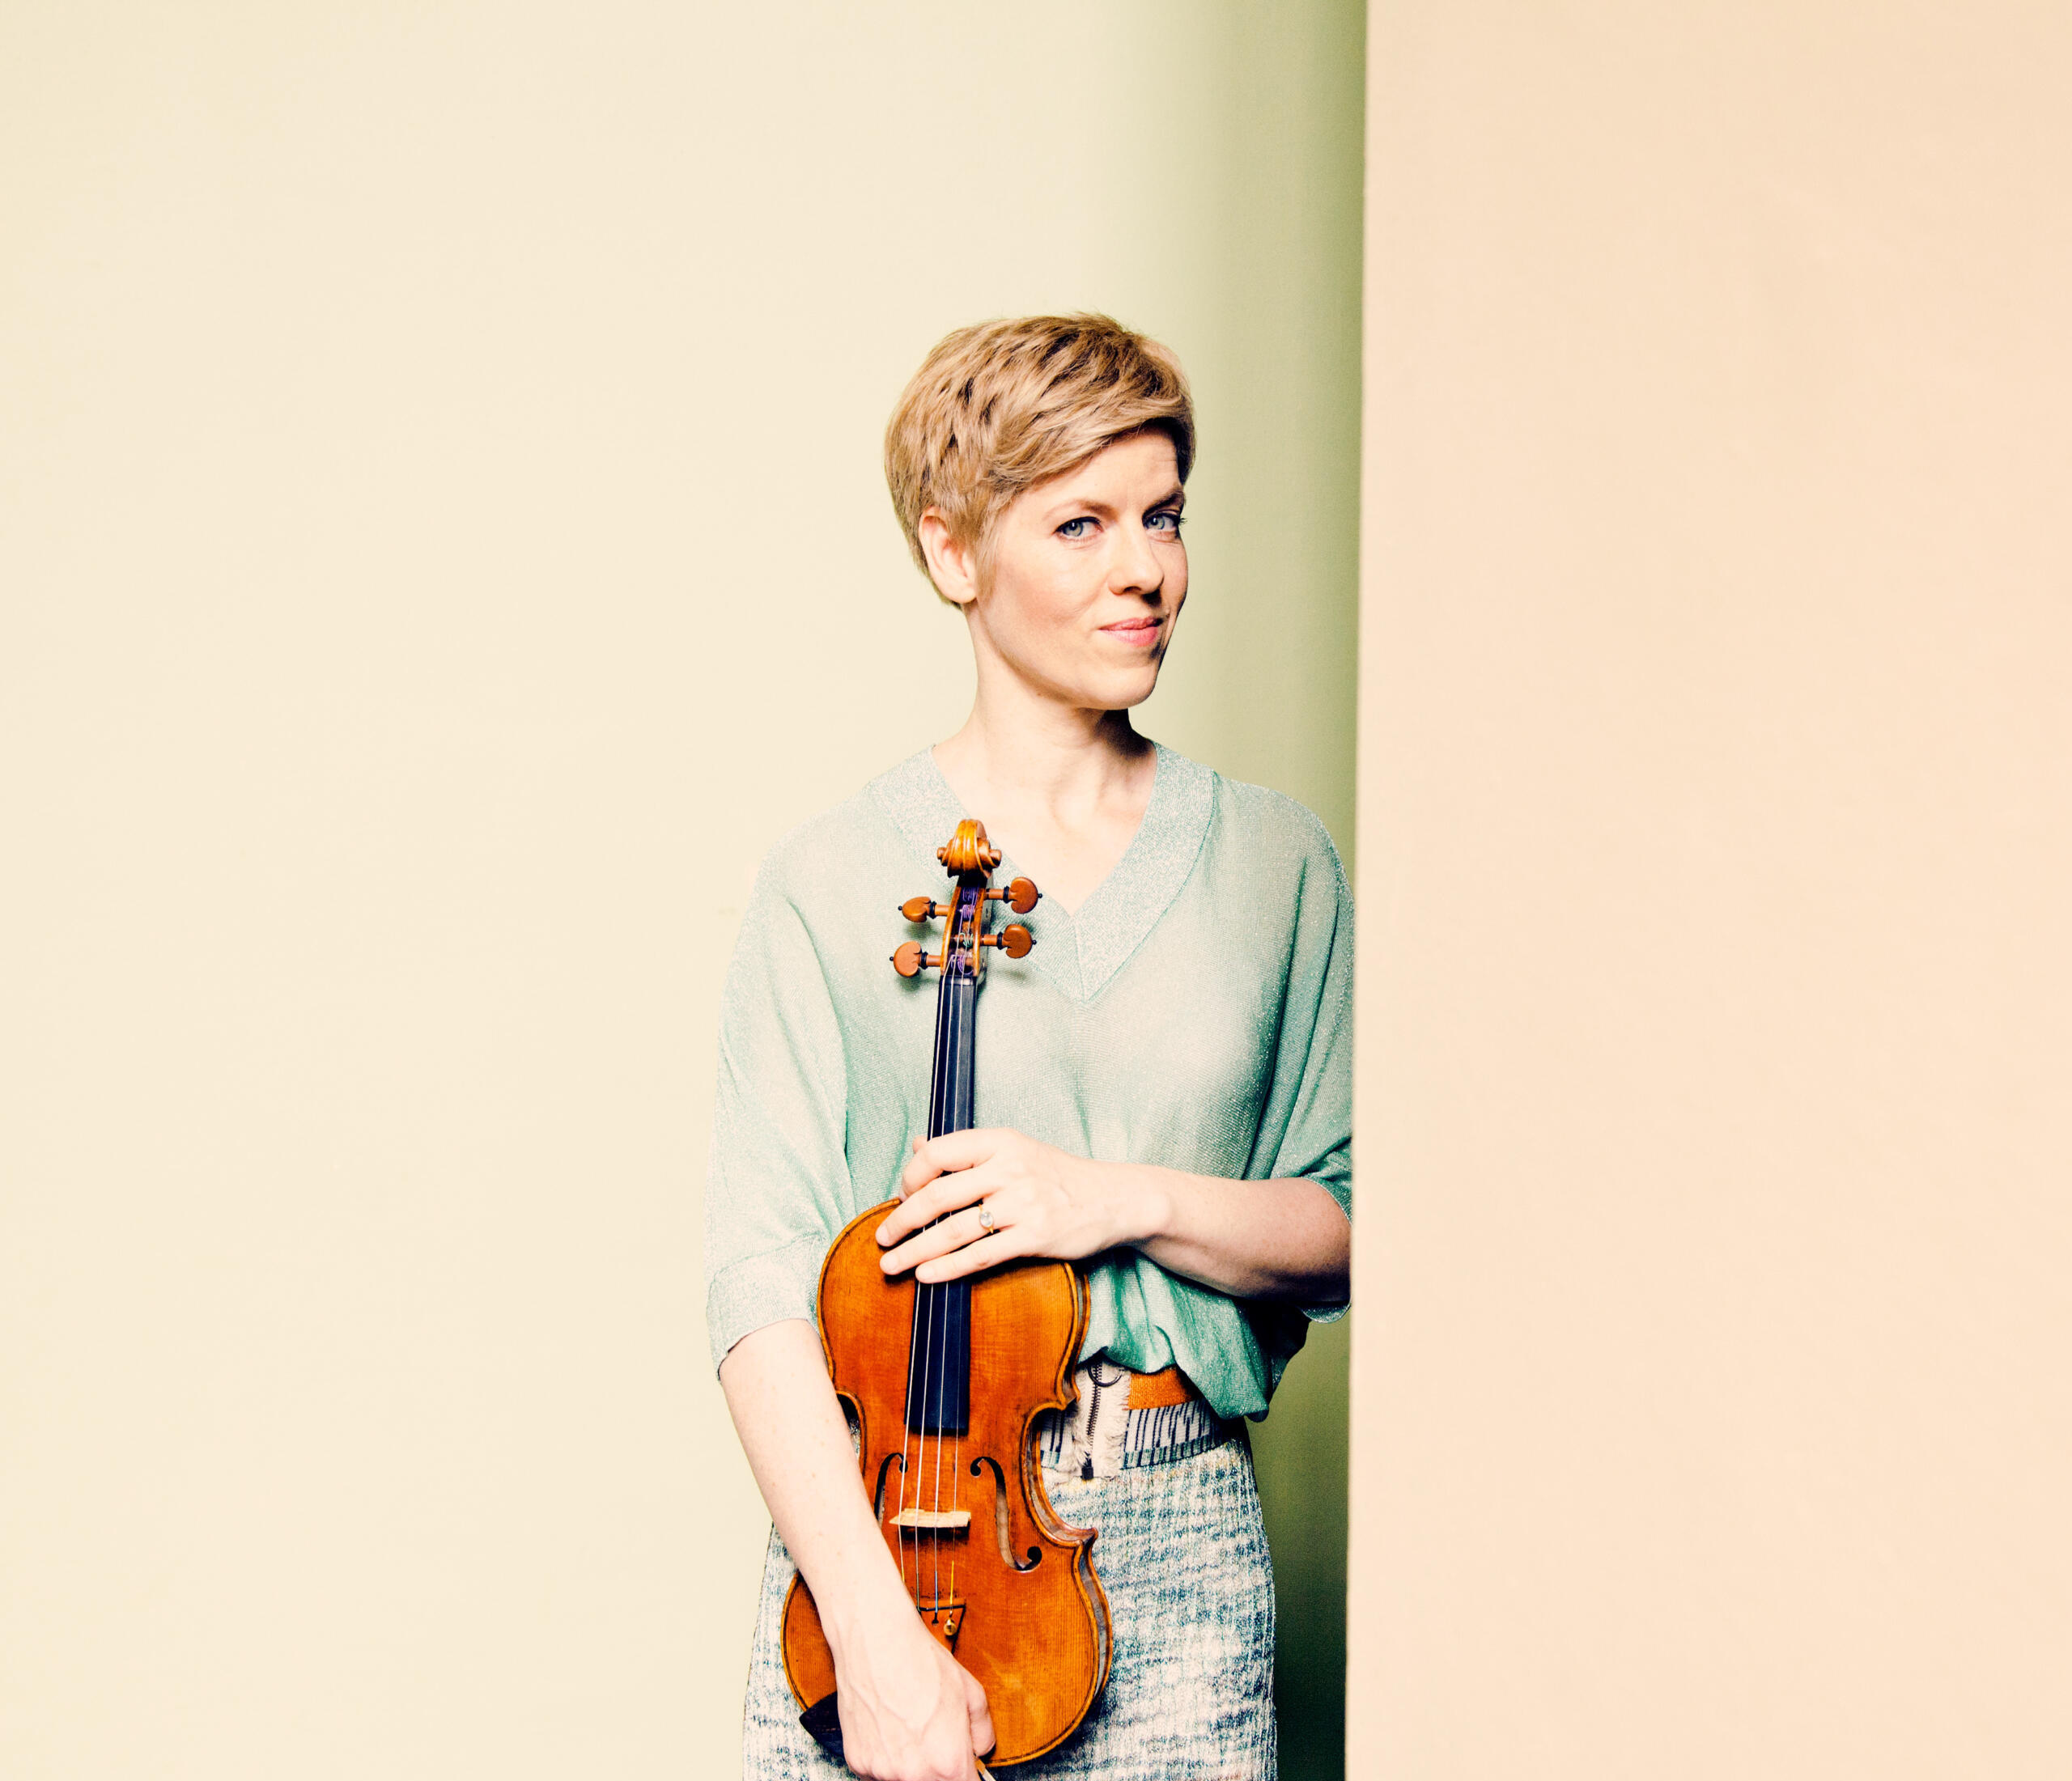 Portrait of the violinist Isabelle Faust. She holds her violin in her hand and stands leaning against a beige wall.